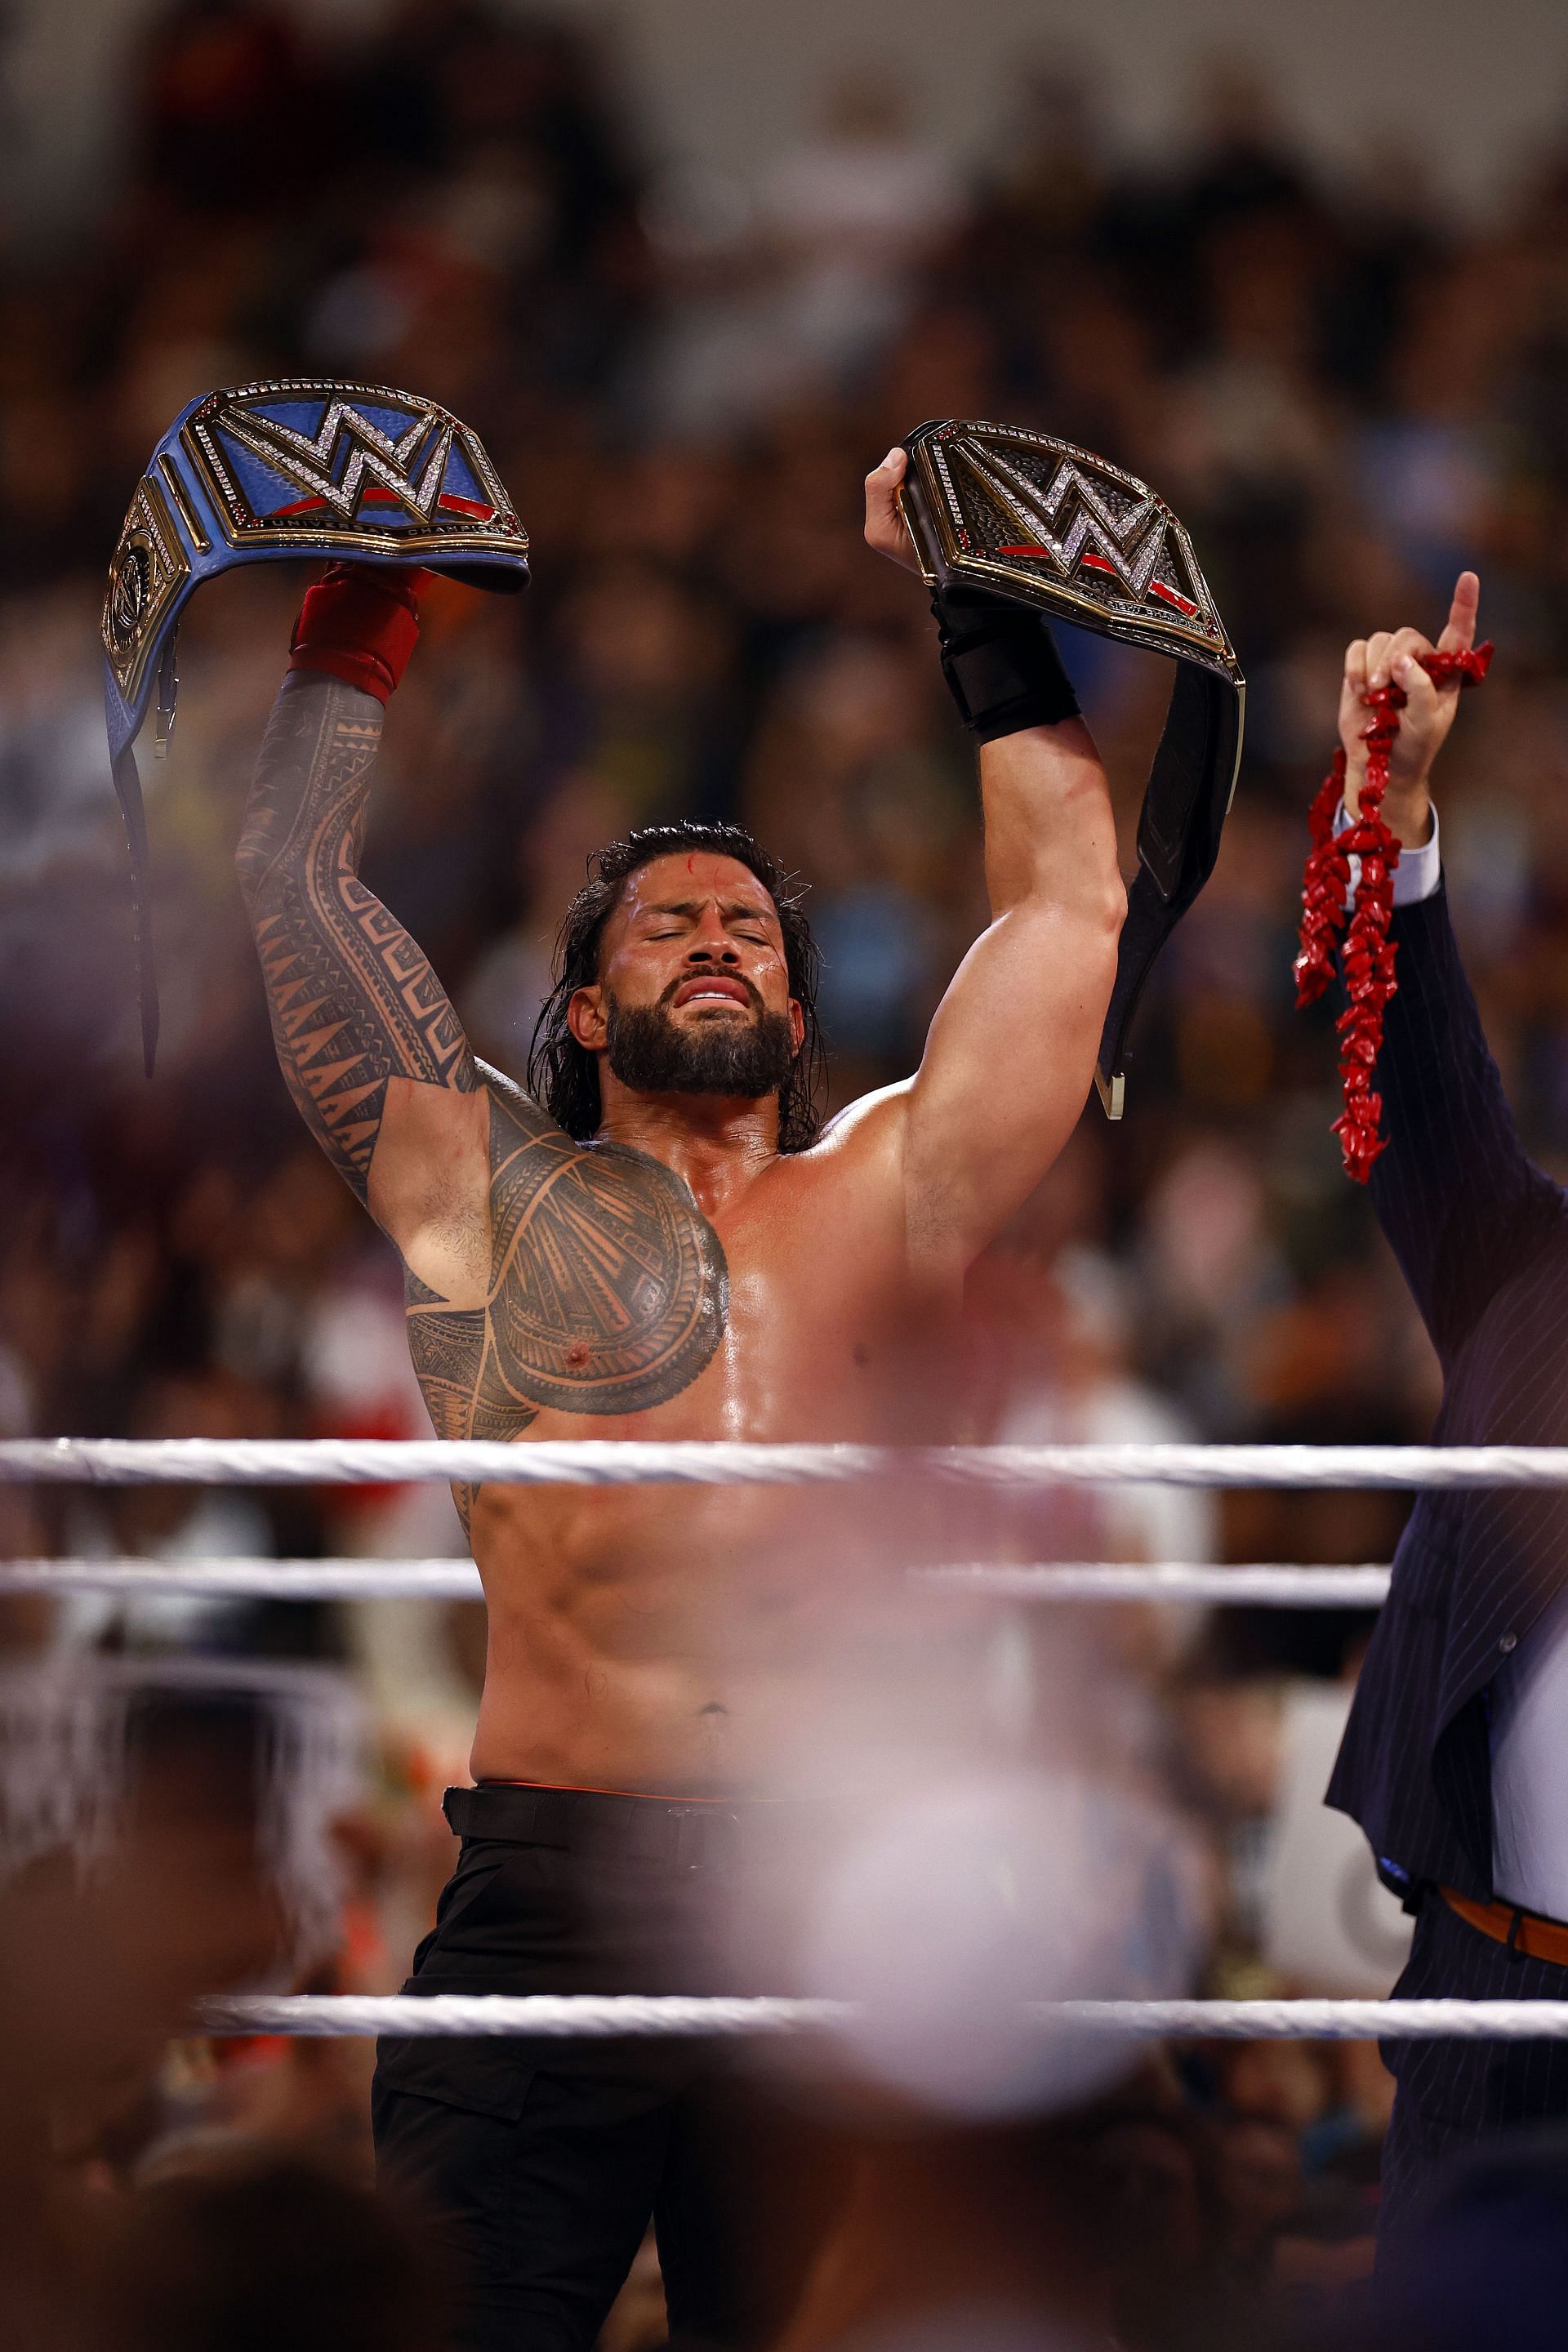 Roman Reigns is the face of WWE